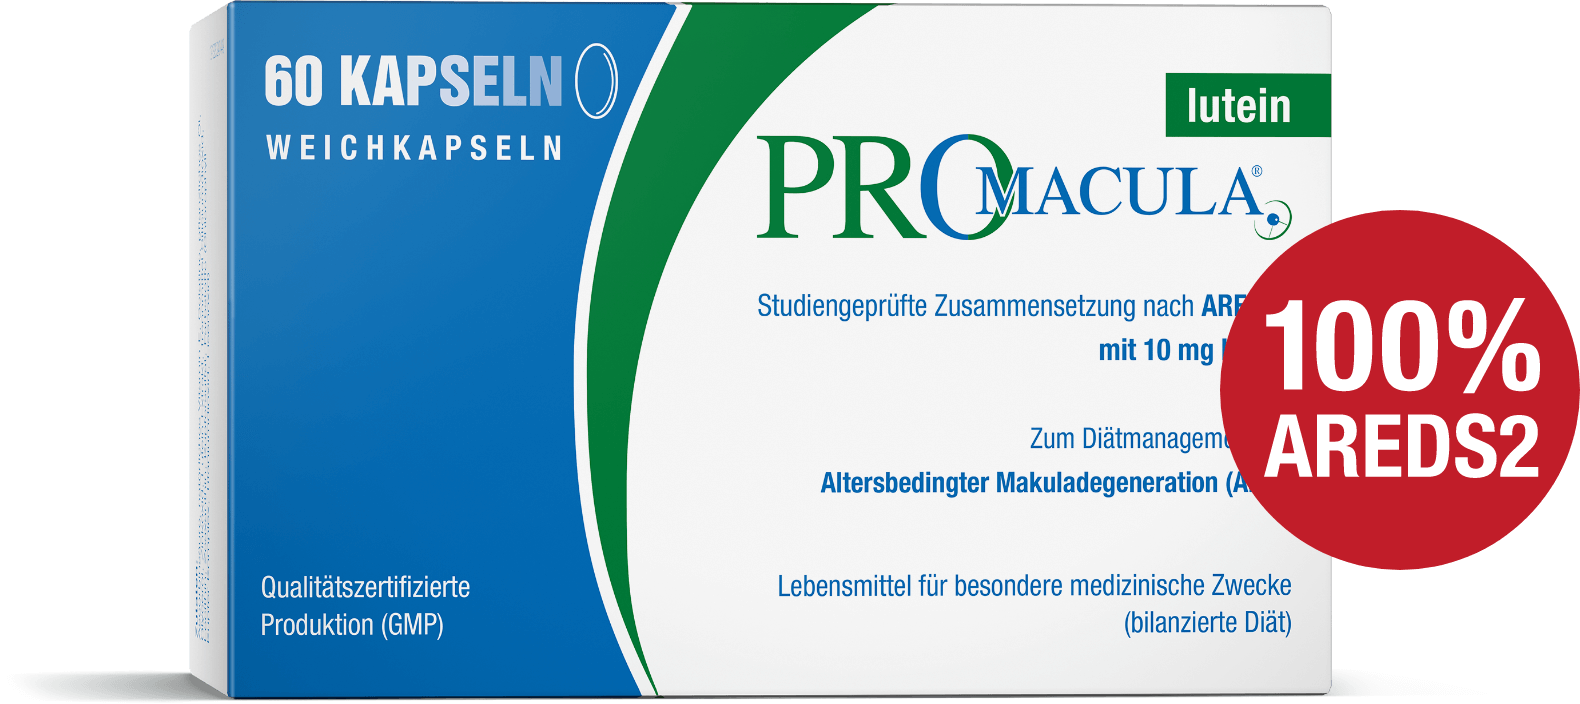 PROMACULA®: 100% areds2